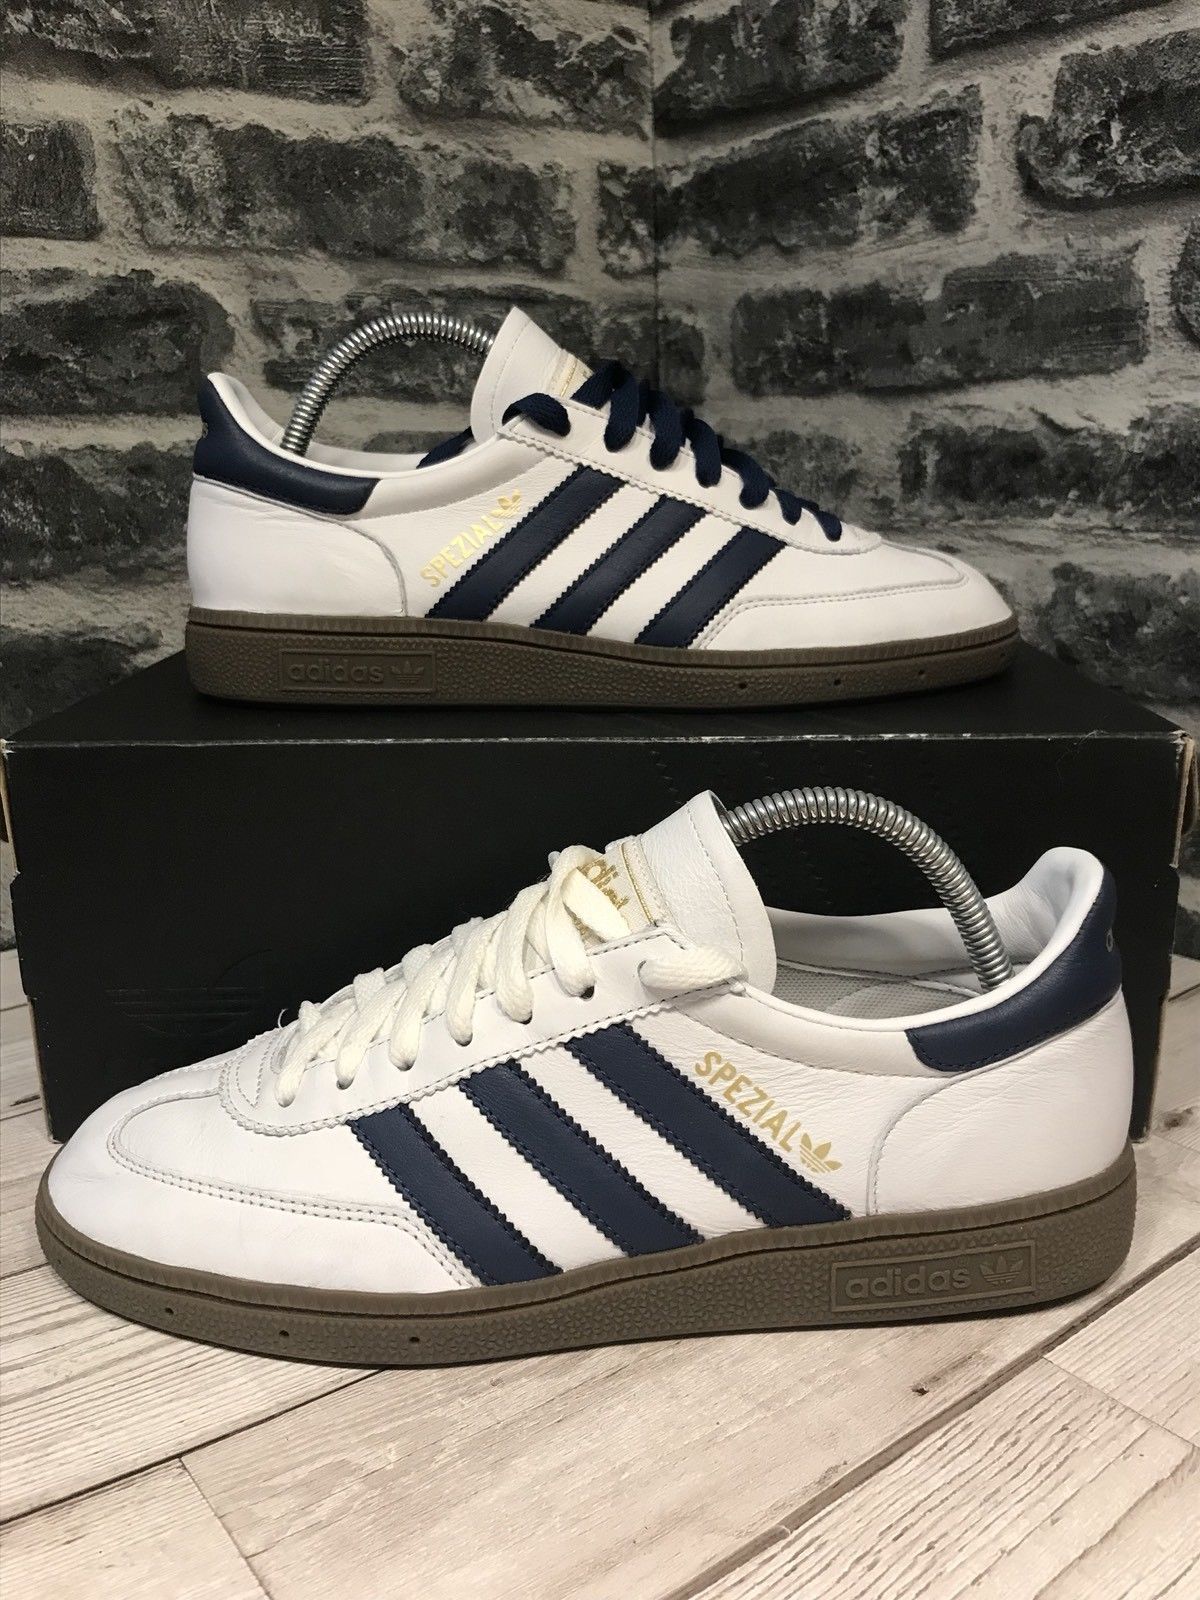 Dageraad Verlichten Correlaat Retro Soles on Twitter: "FOR SALE:- #adidas #spezial #mi white / blue  leather NG cw UK Size 7 Two sets of laces blue &amp; white 10/10 Condition  with adidas pumpbag and og